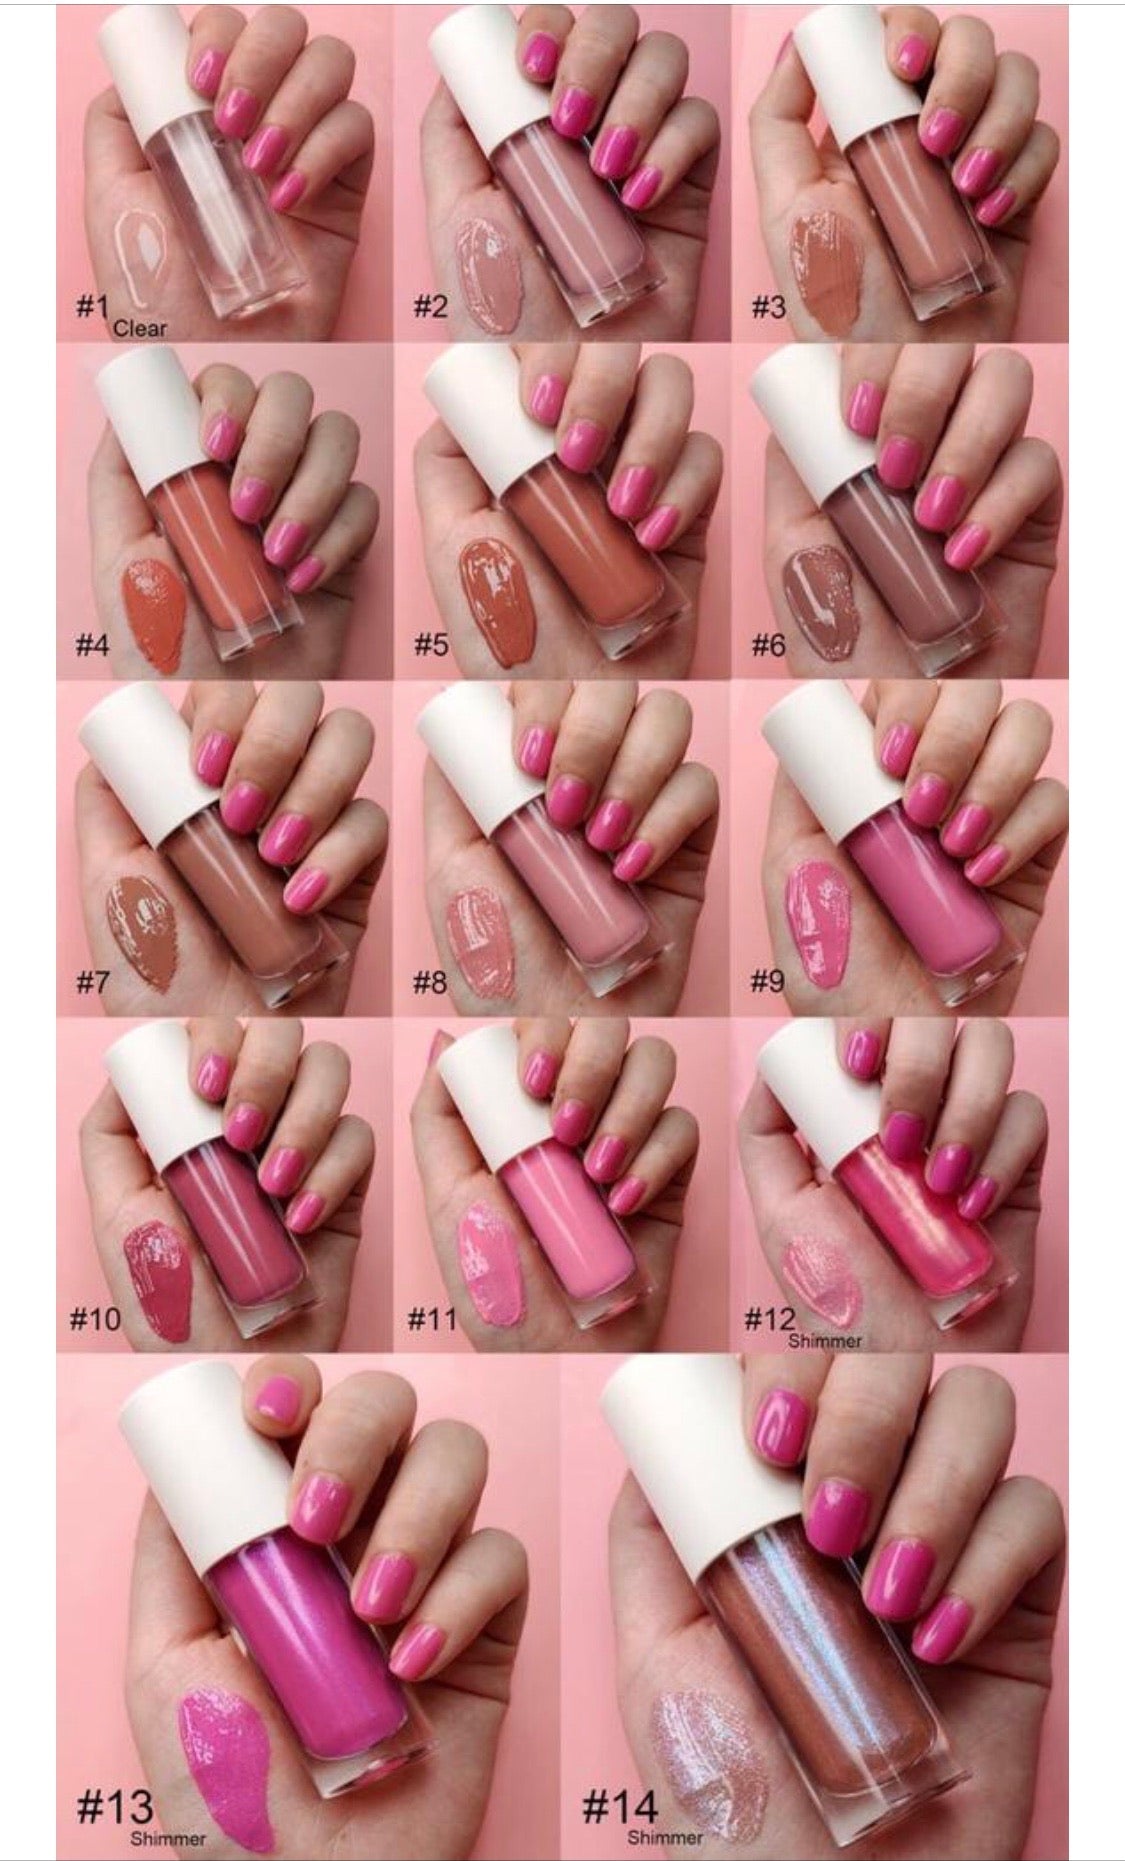 PRIVATE LABEL, Wholesale Luxury PREMIUM quality pre-filled Waterproof Long Lasting Nude/Shimmer Plumping Lipgloss. 27colours (Free Shipping)